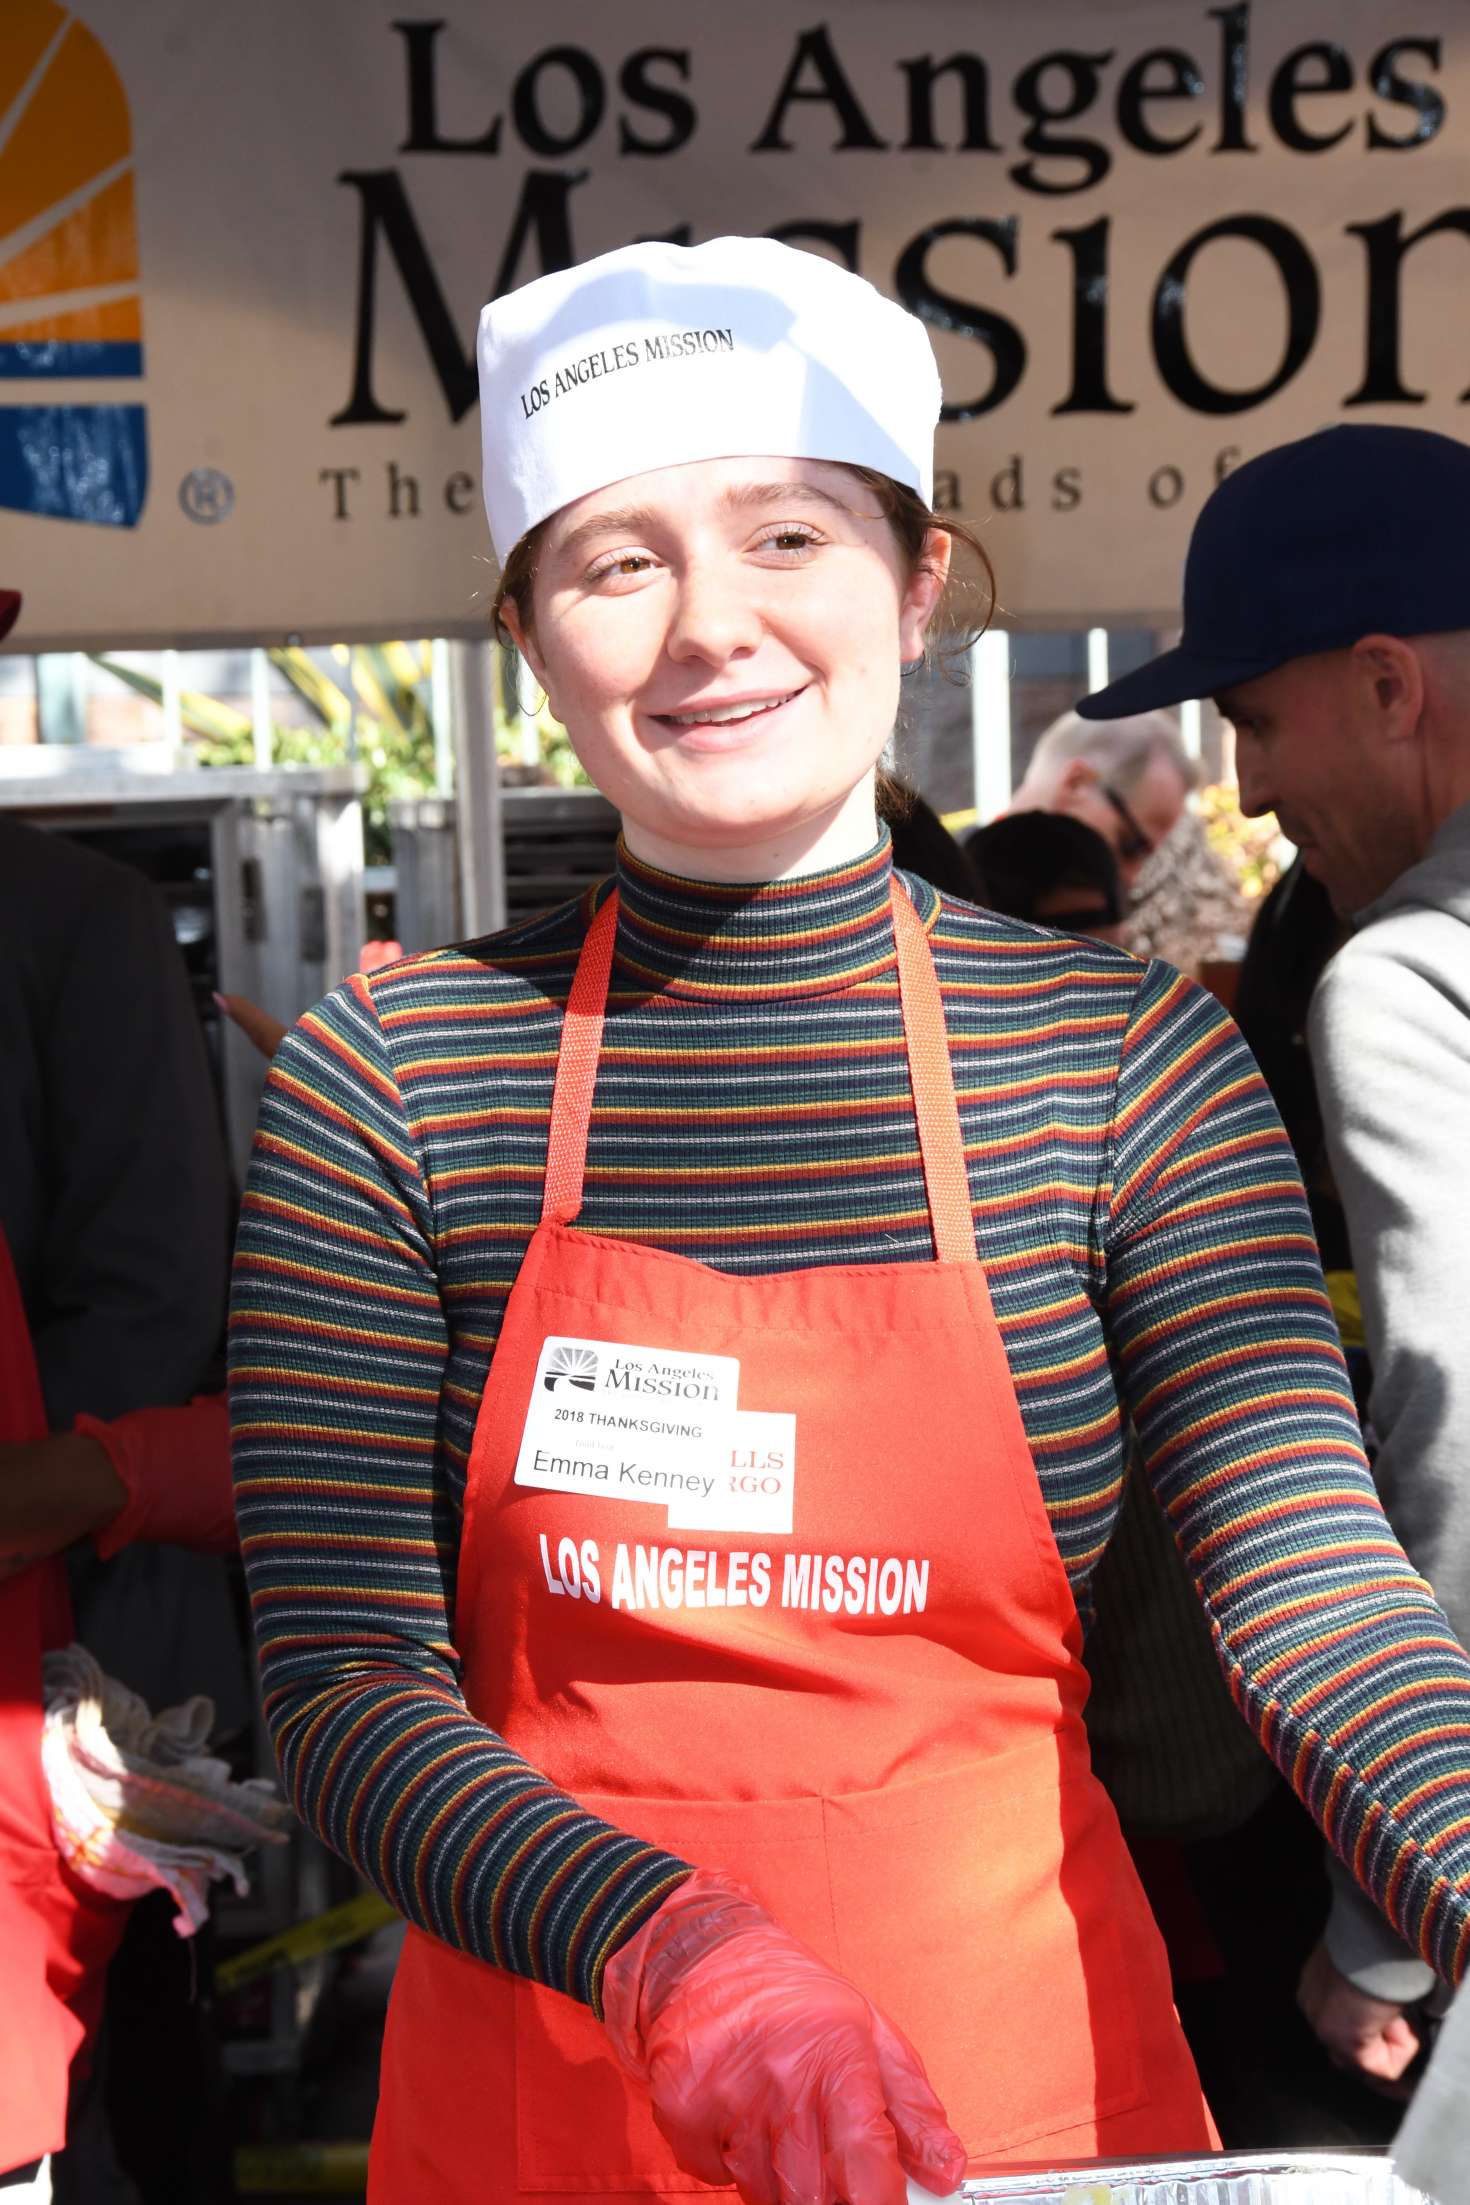 Emma Kenney â€“ Los Angeles Mission Thanksgiving Meal for the Homeless